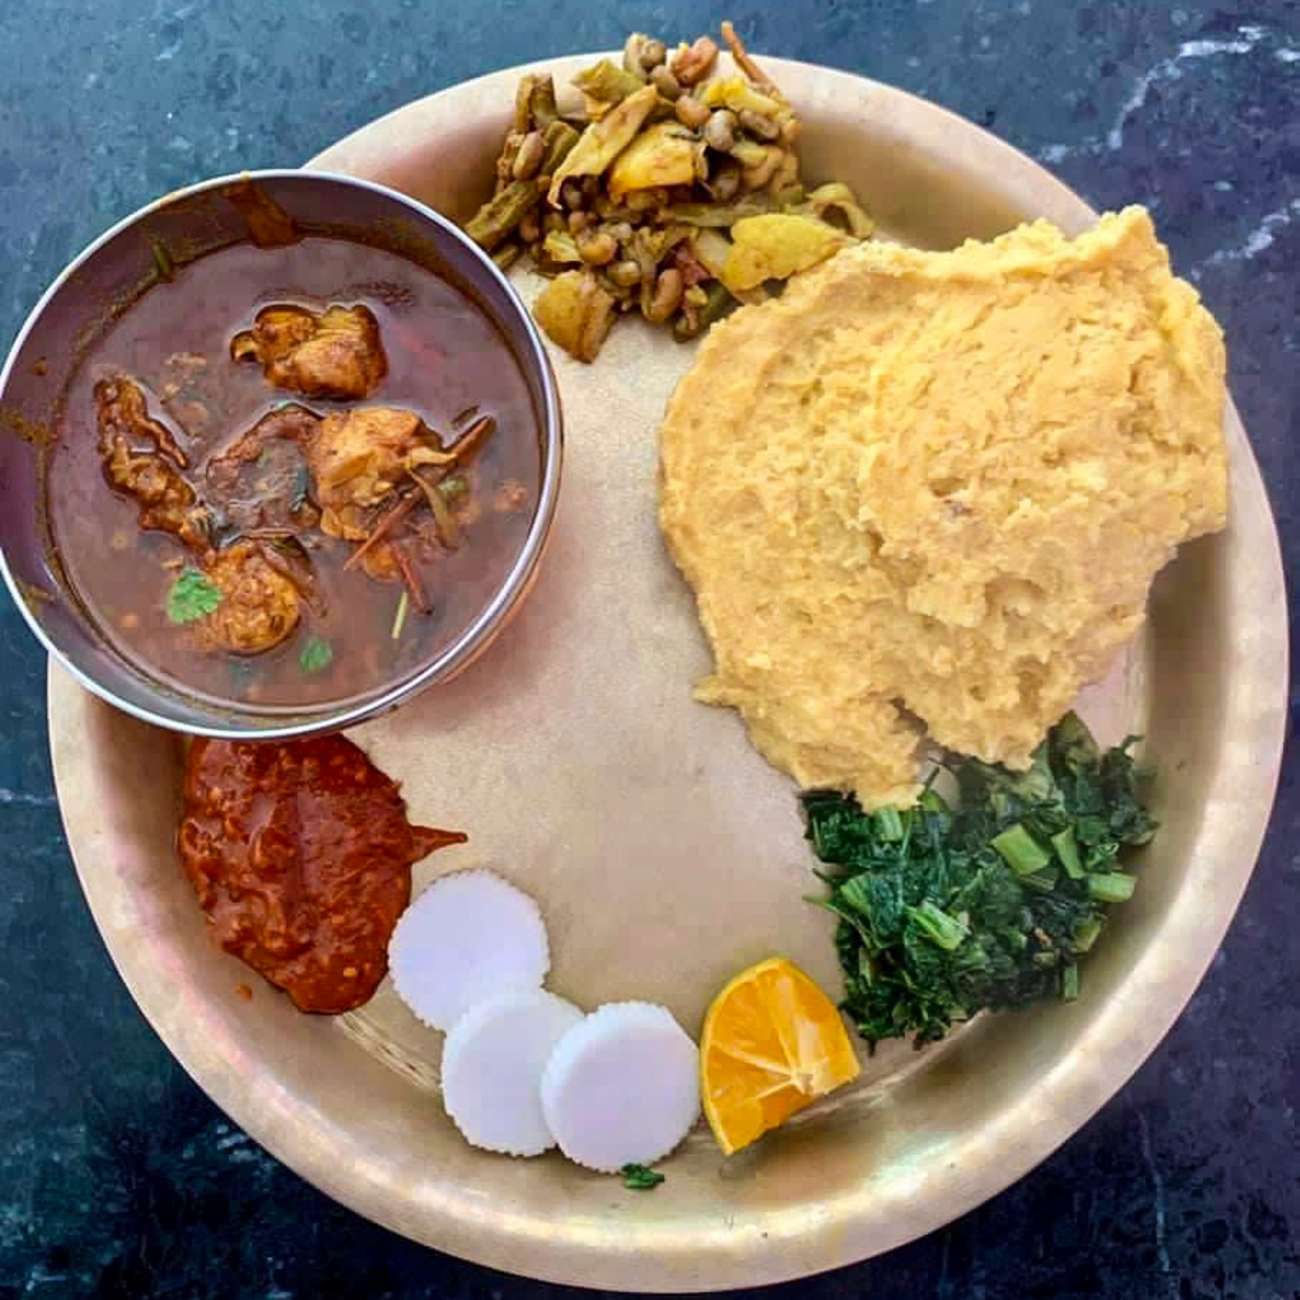 Nepali Food: 10 Must-Try Traditional Dishes of Nepal